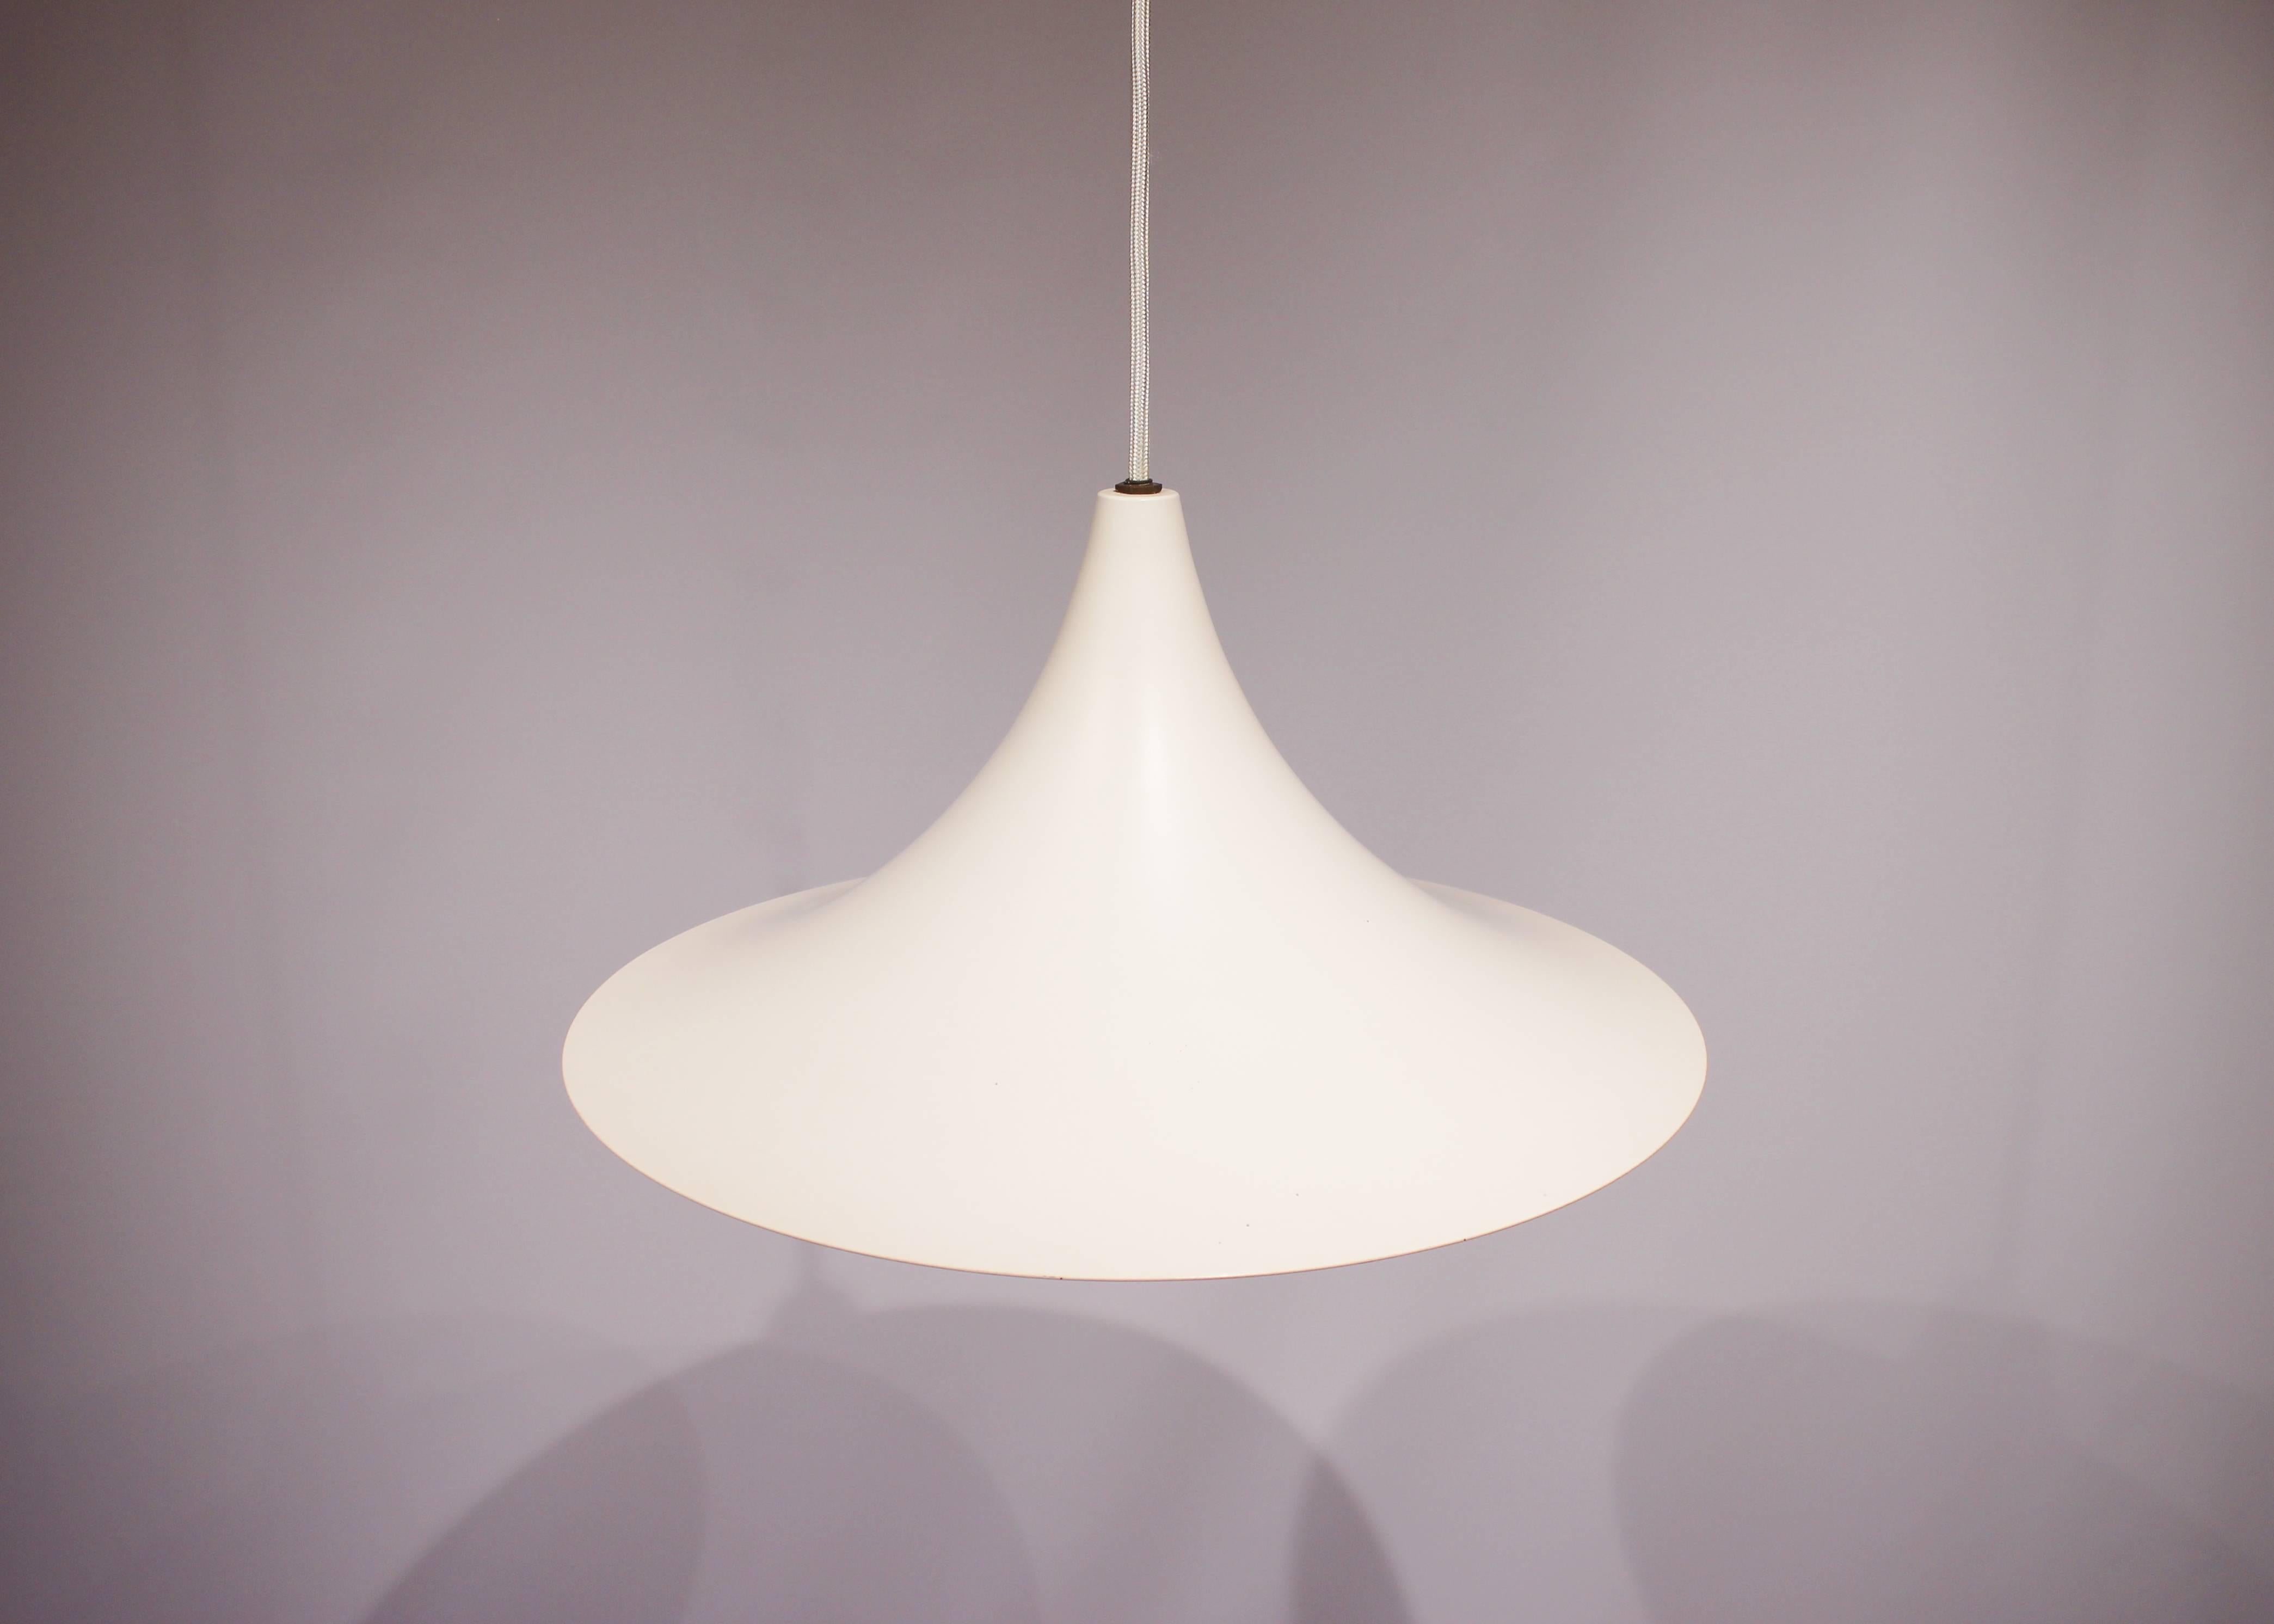 White pendant of Danish design from the 1960s. The lamp is in great vintage condition and with a new white fabric cord.